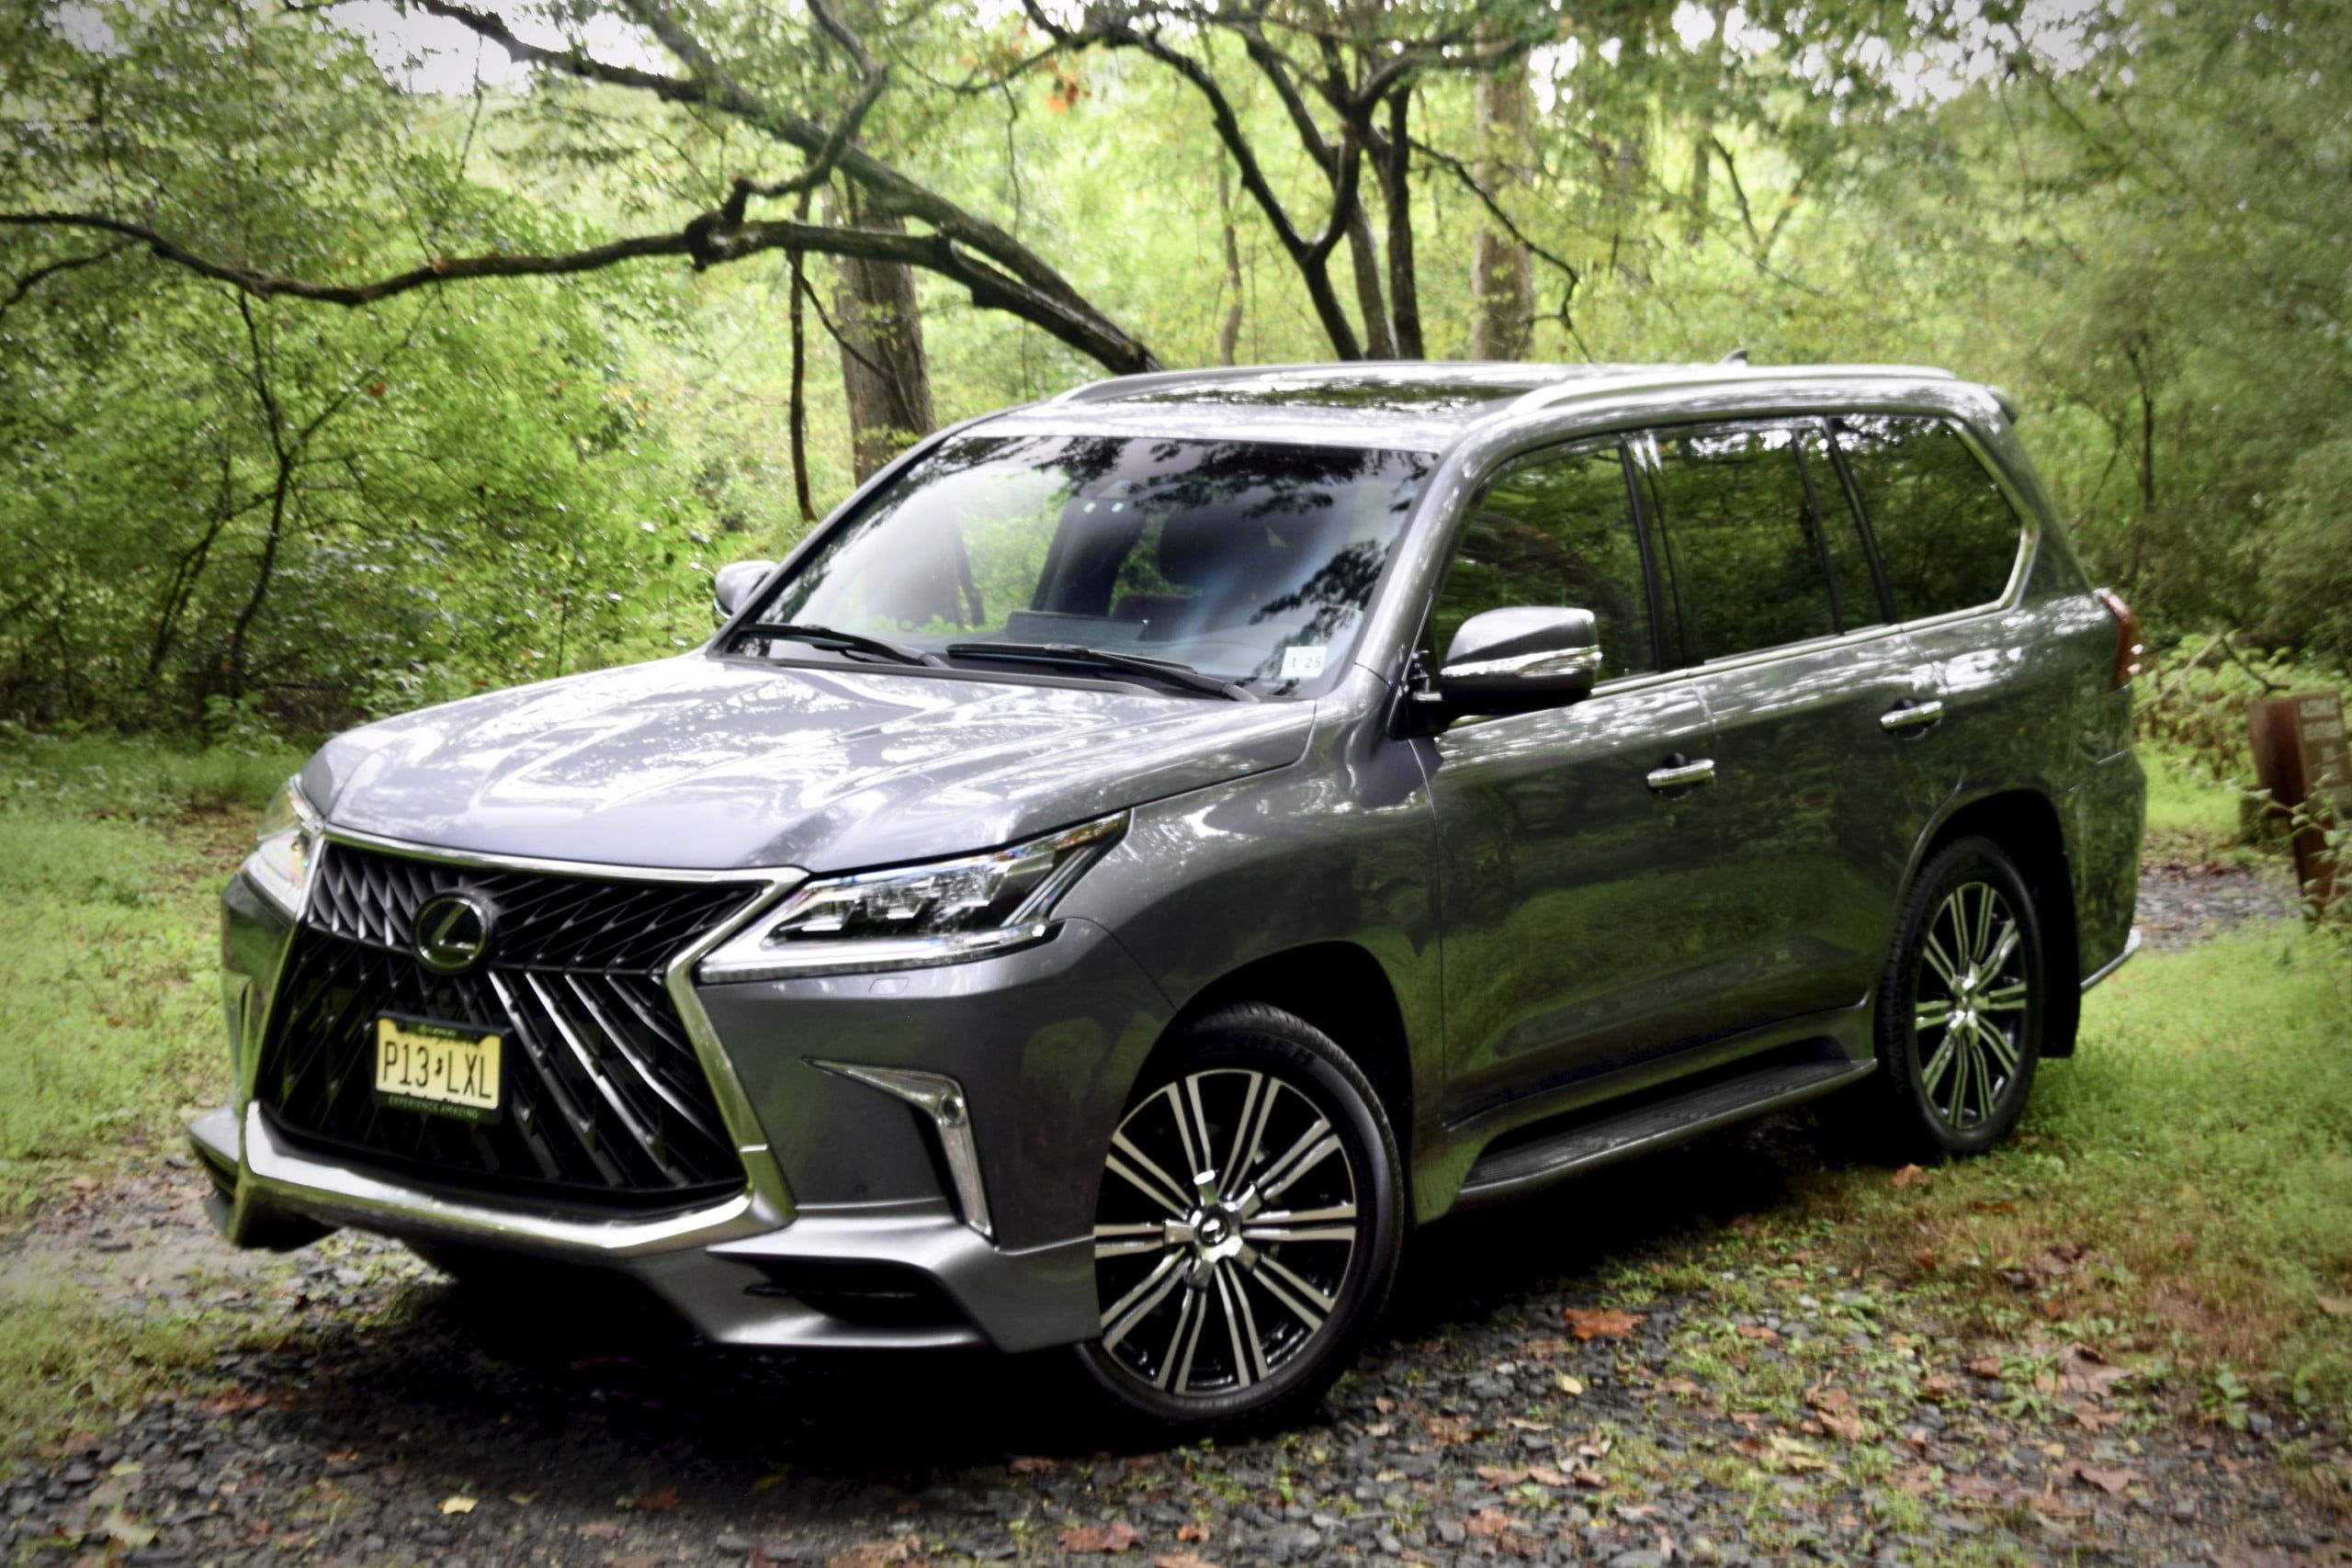 2021 Lexus LX 570 parked in lush greenspace